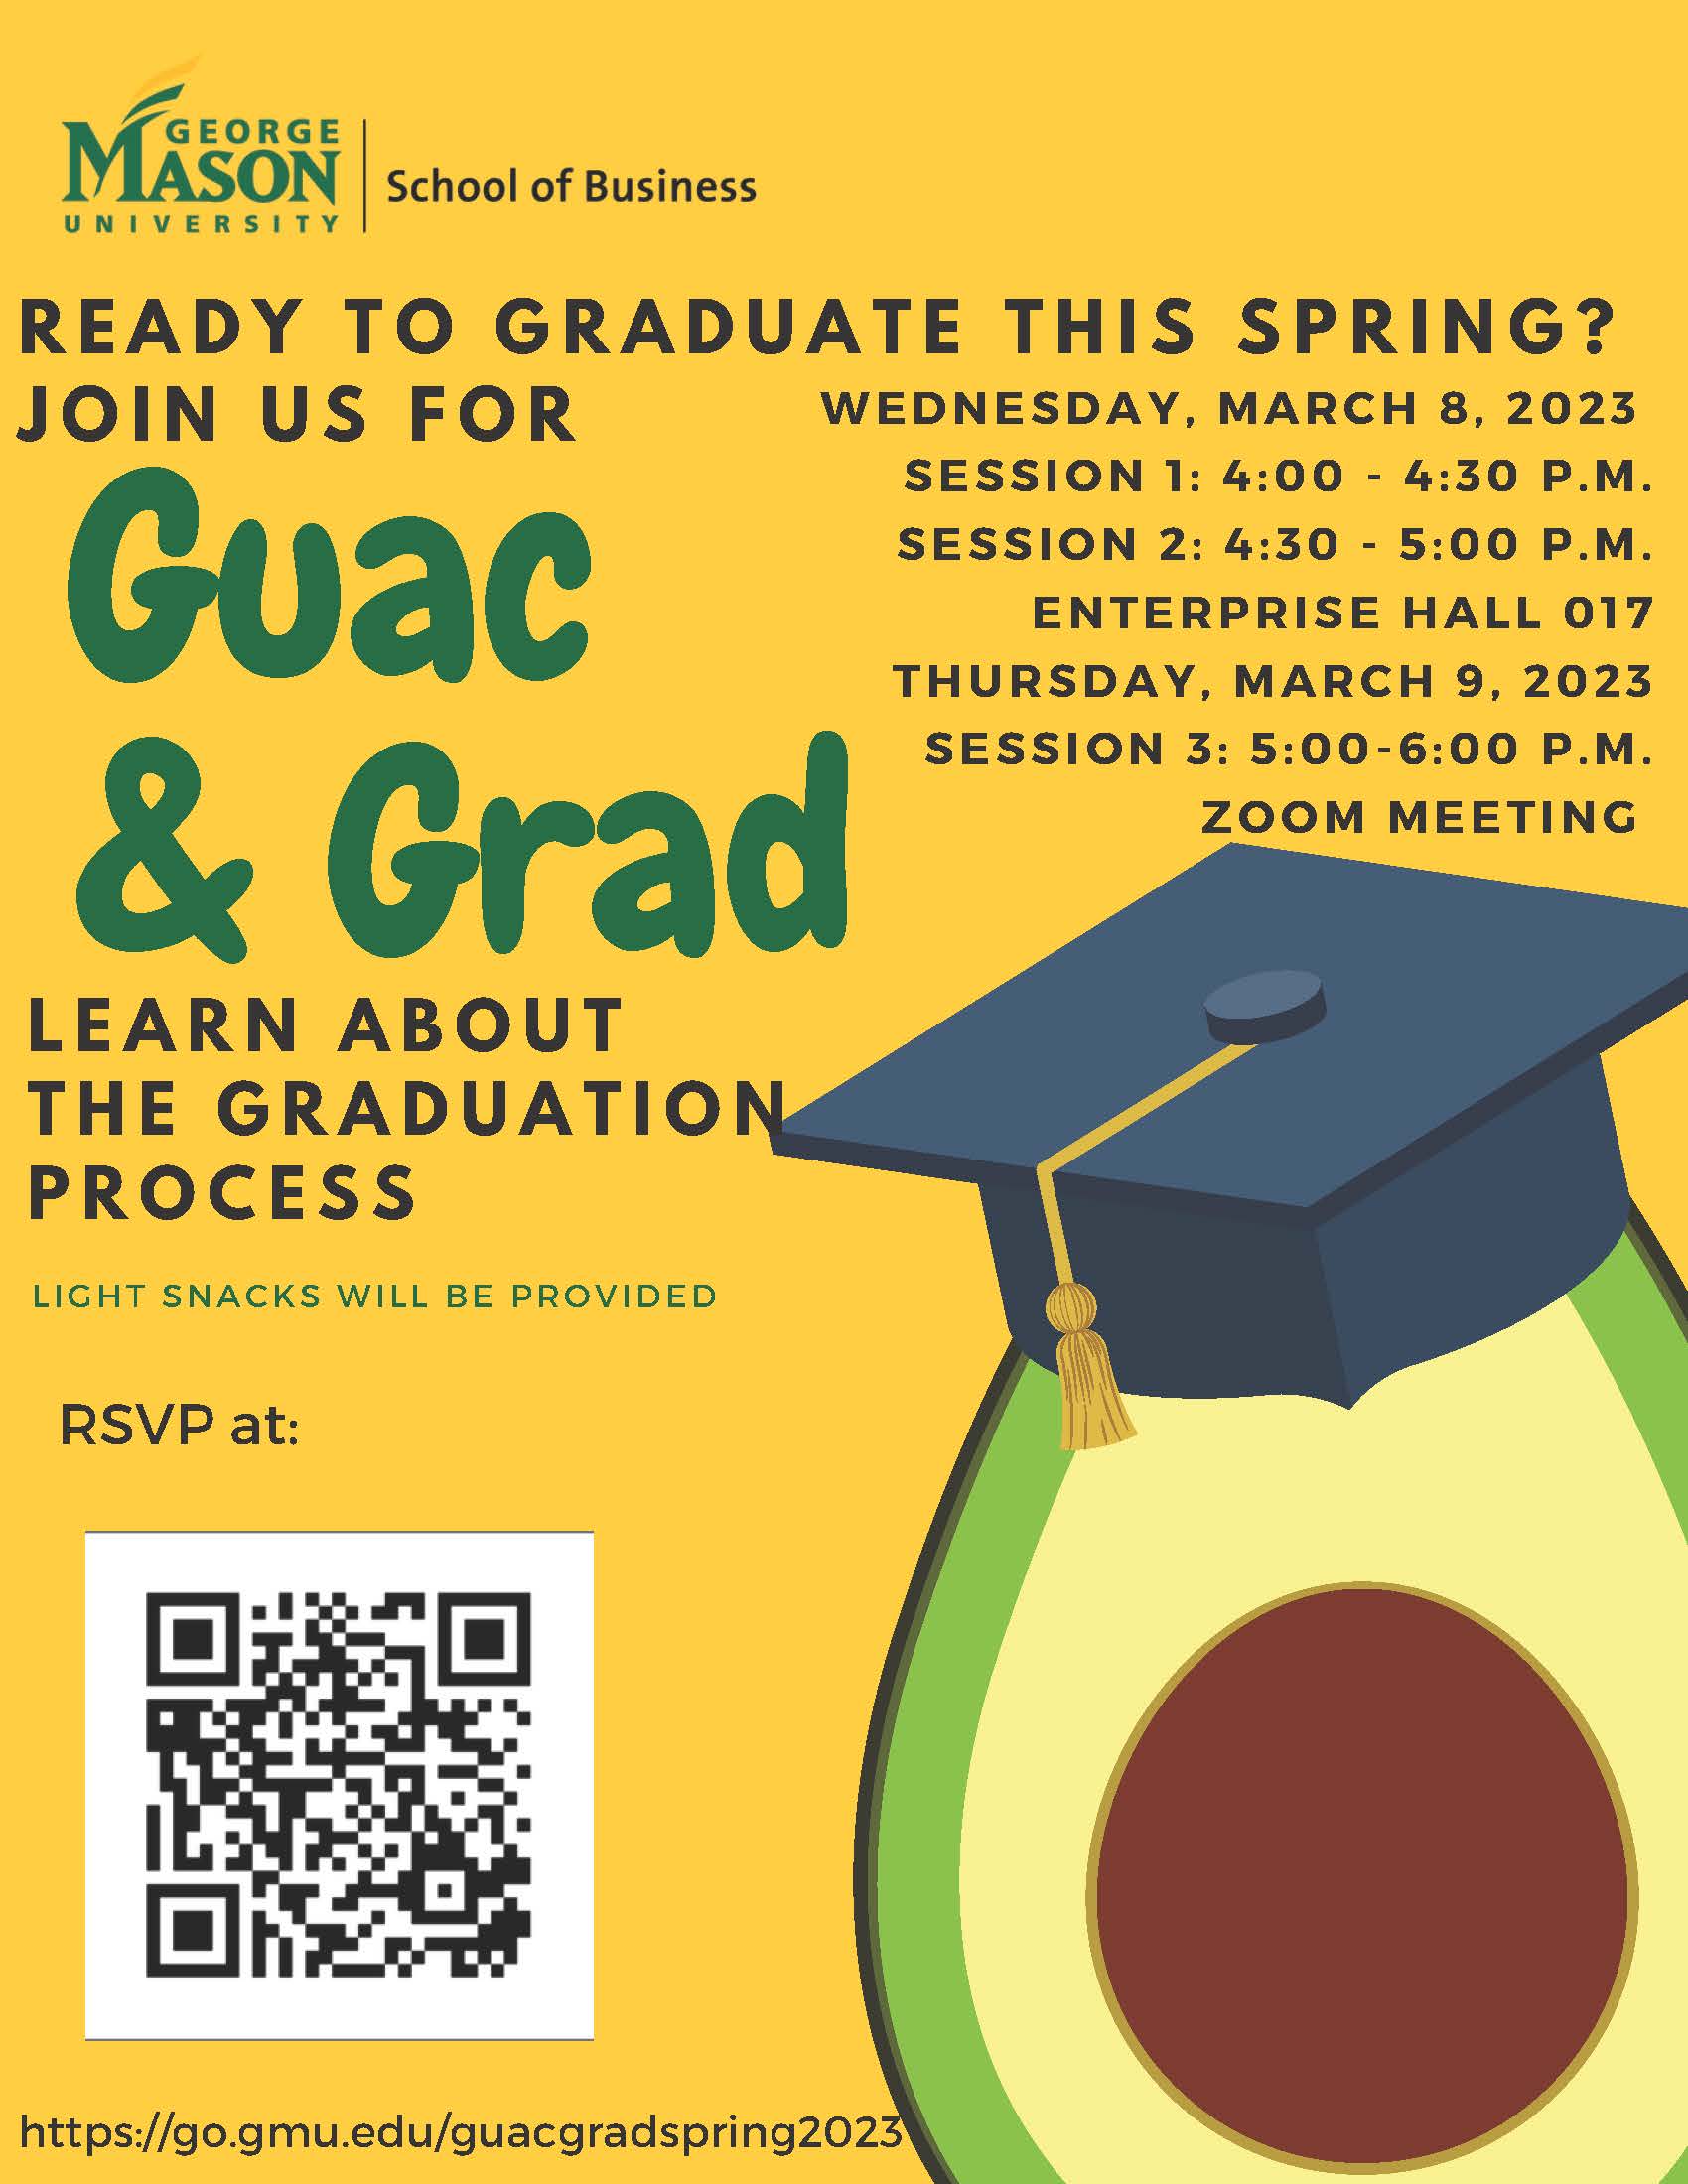 School of Business spring 2023 Guac & Grad invite - sessions on March 8 in ENT 017 and March 9 on Zoom. 